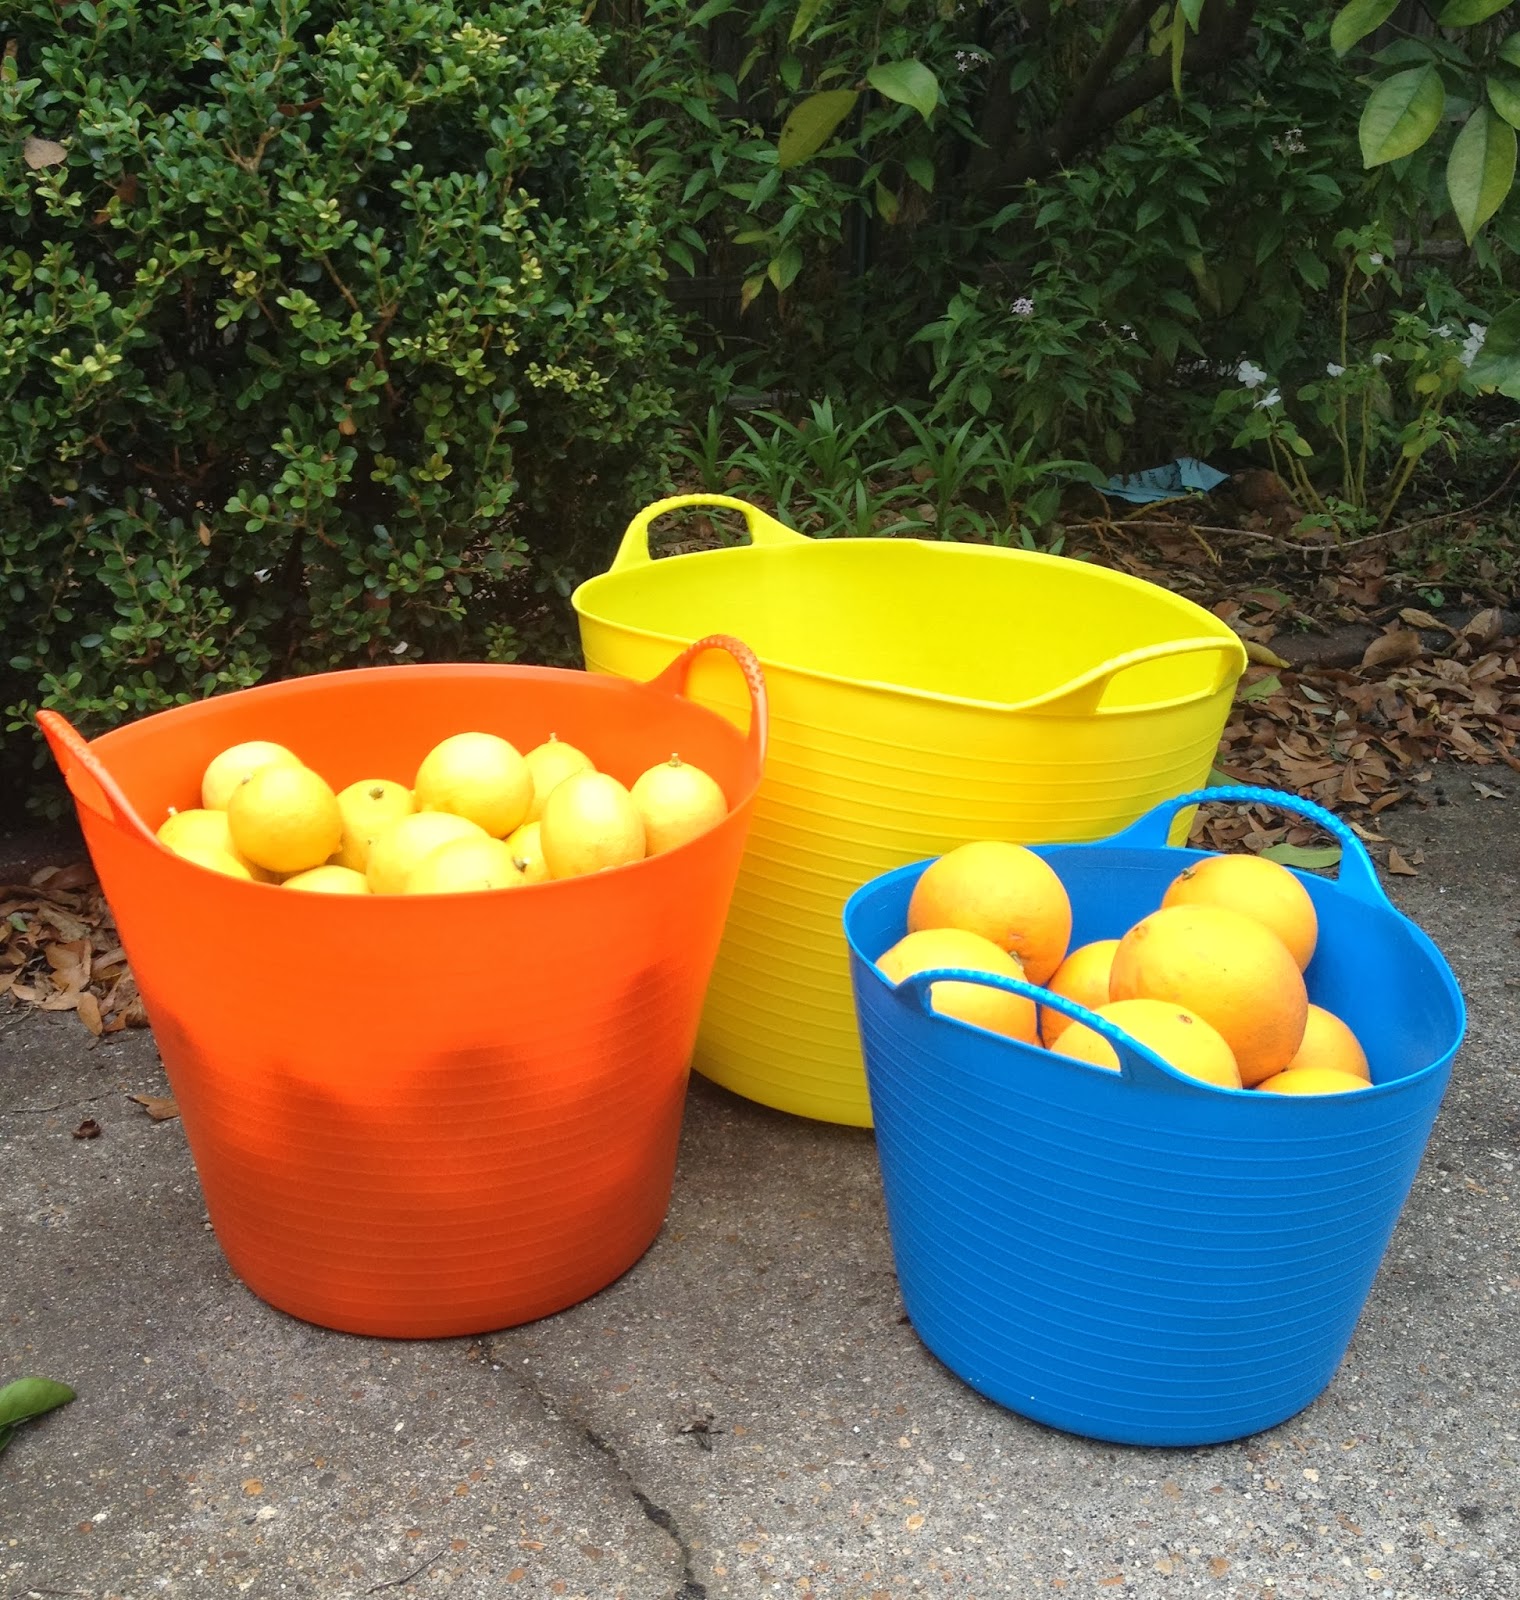 candy-s-blog-oranges-and-lemons